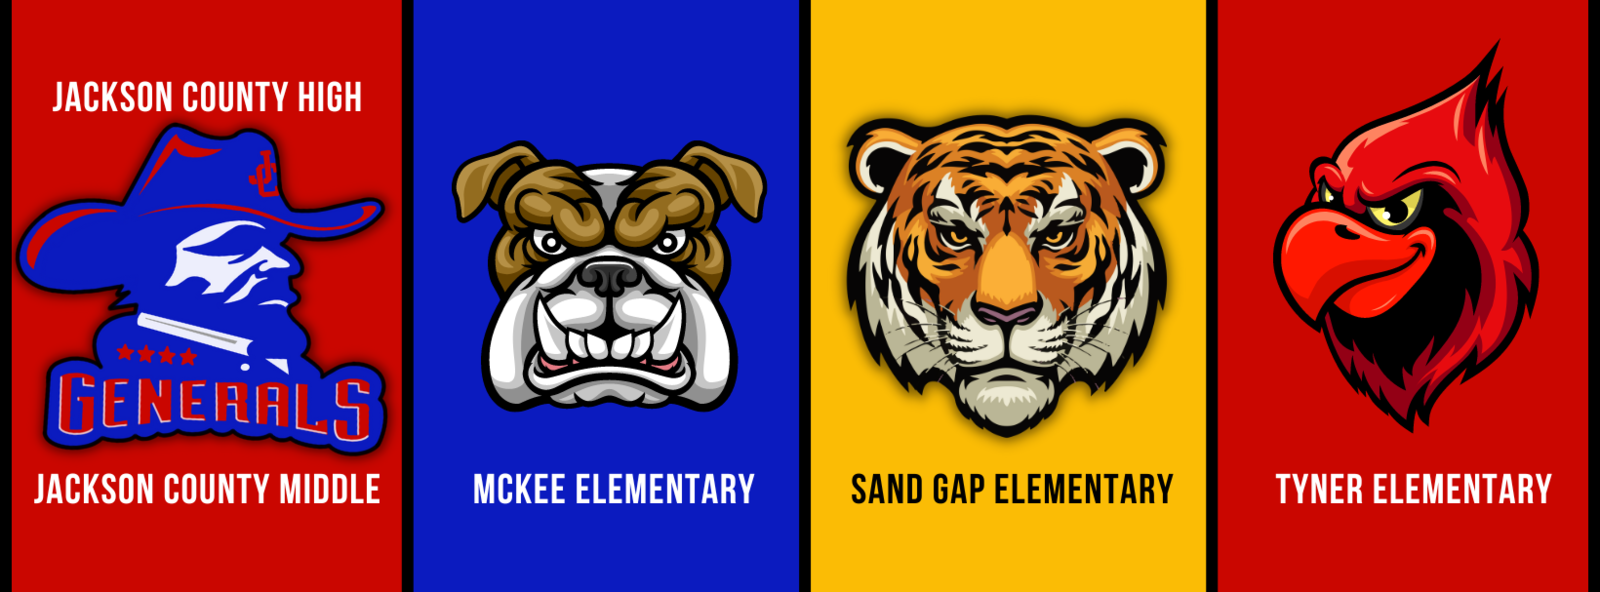 Logos of all schools within the district